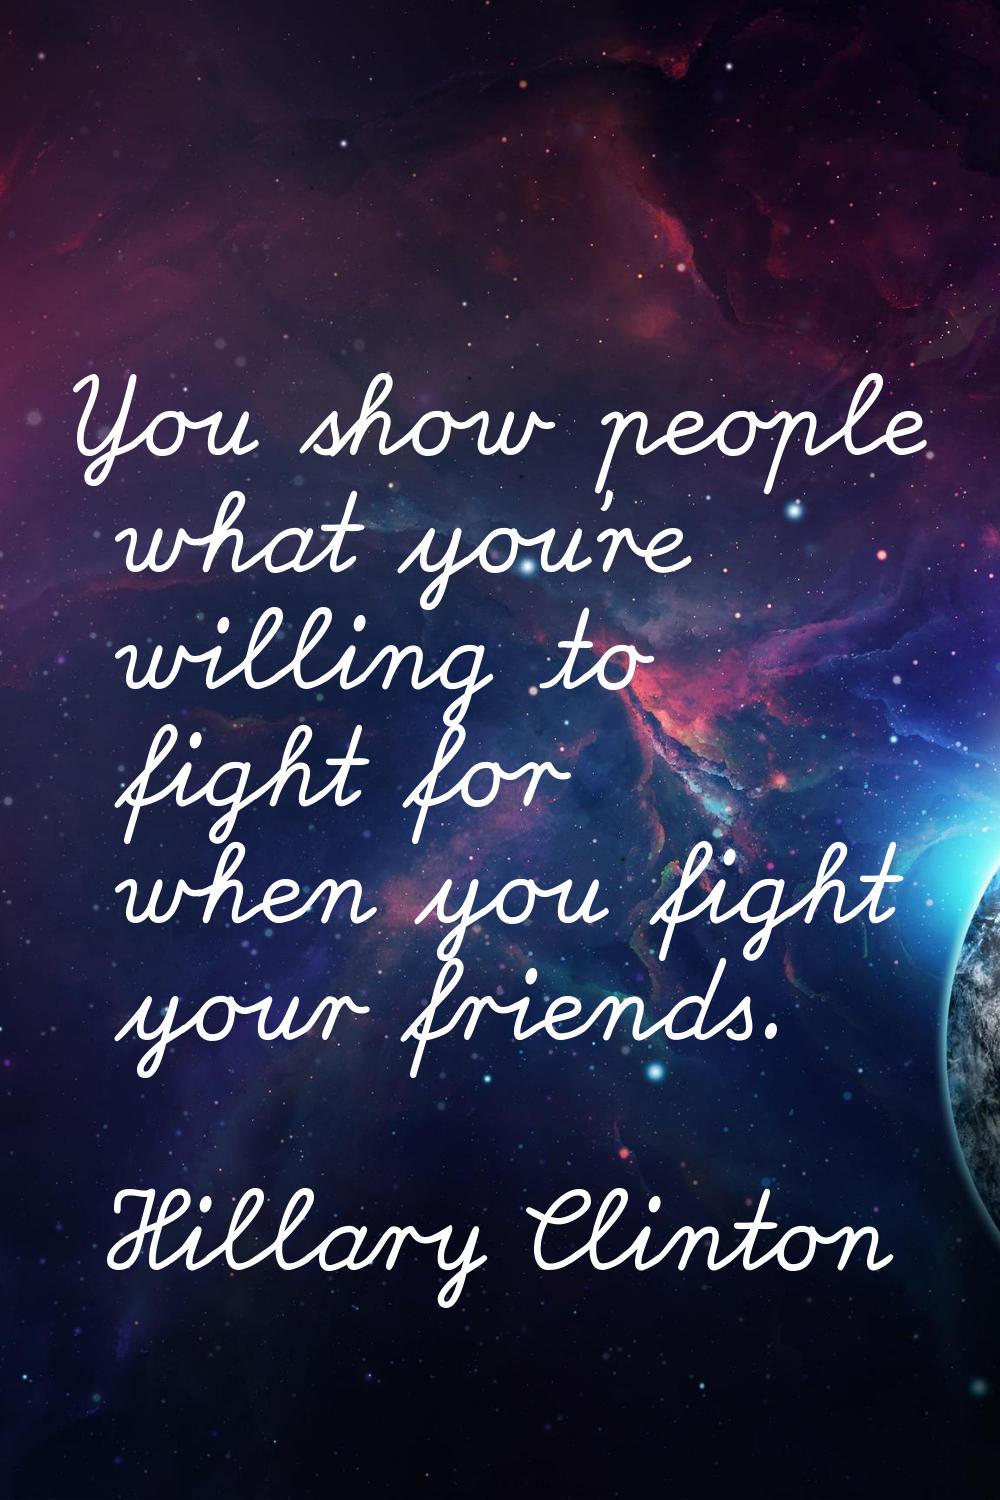 You show people what you're willing to fight for when you fight your friends.